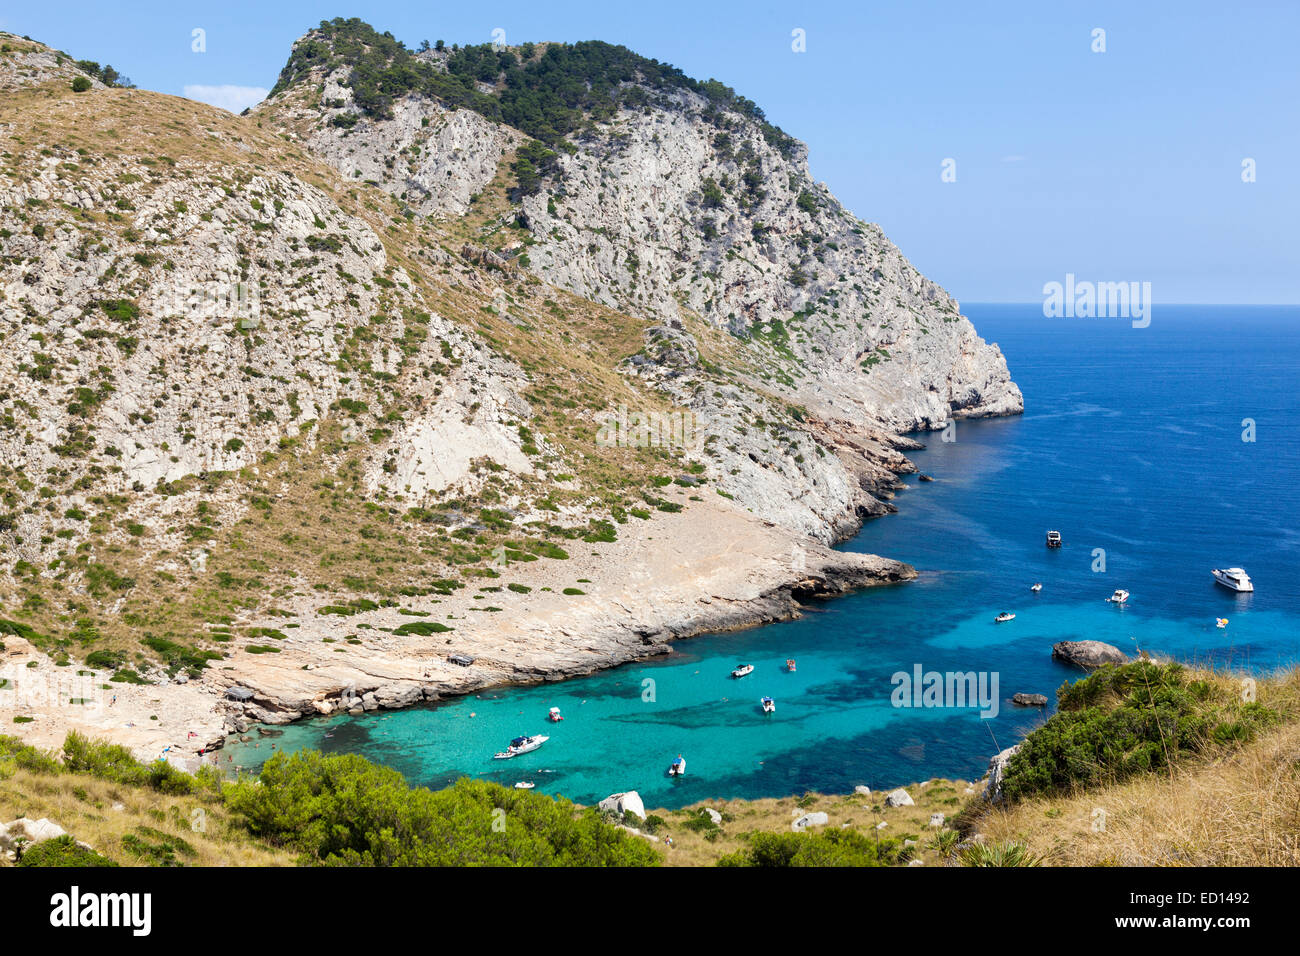 Small cove in Majorca with yatches anchored Stock Photo